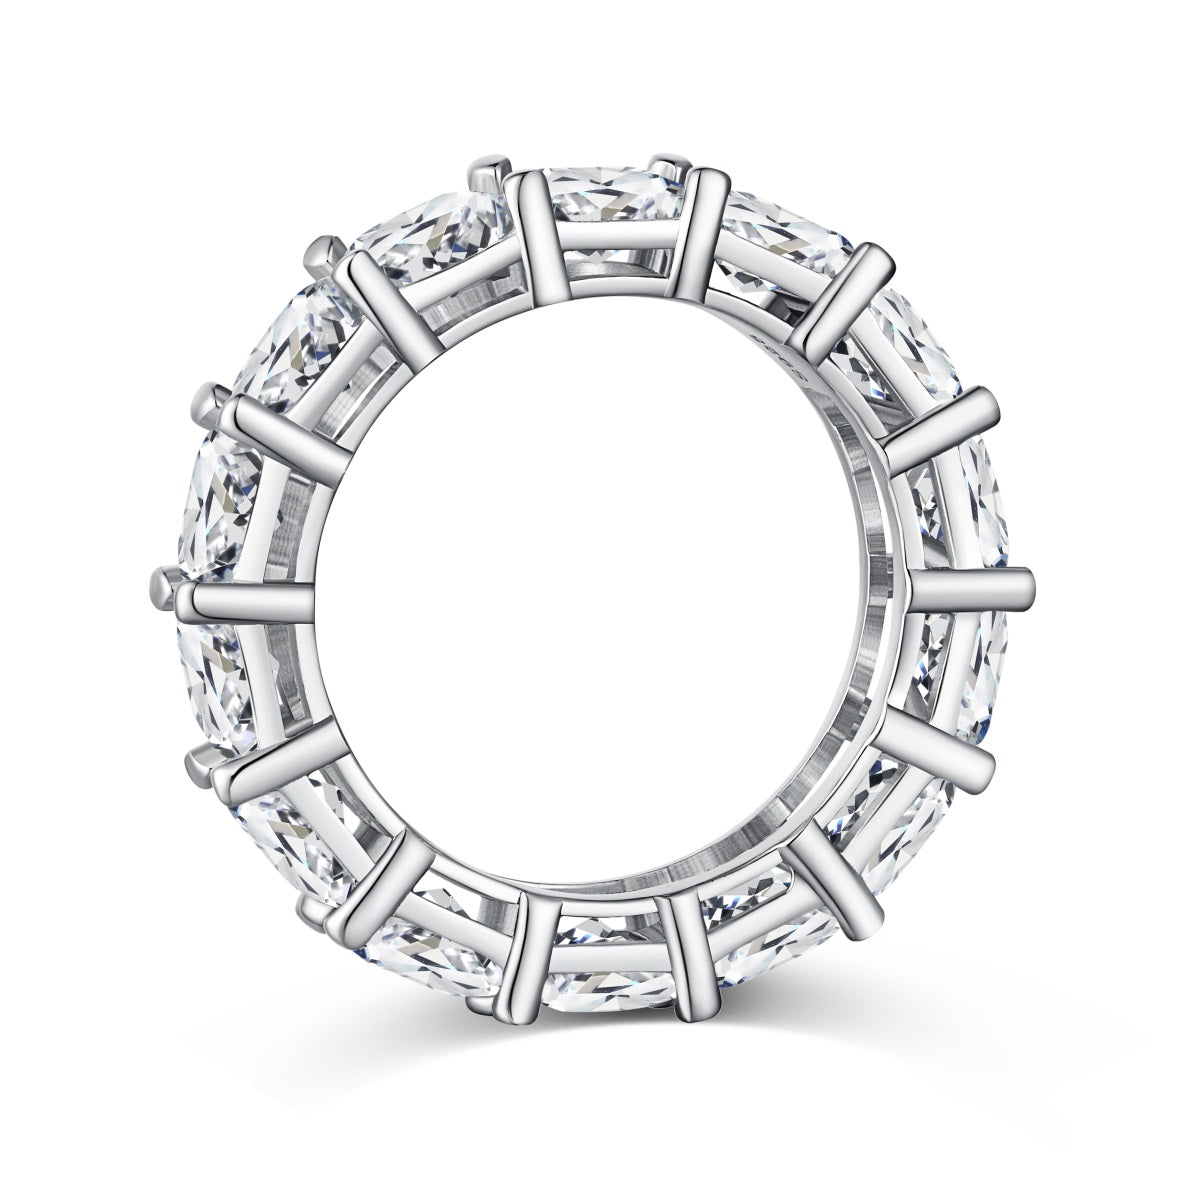 Crystal Square Ring